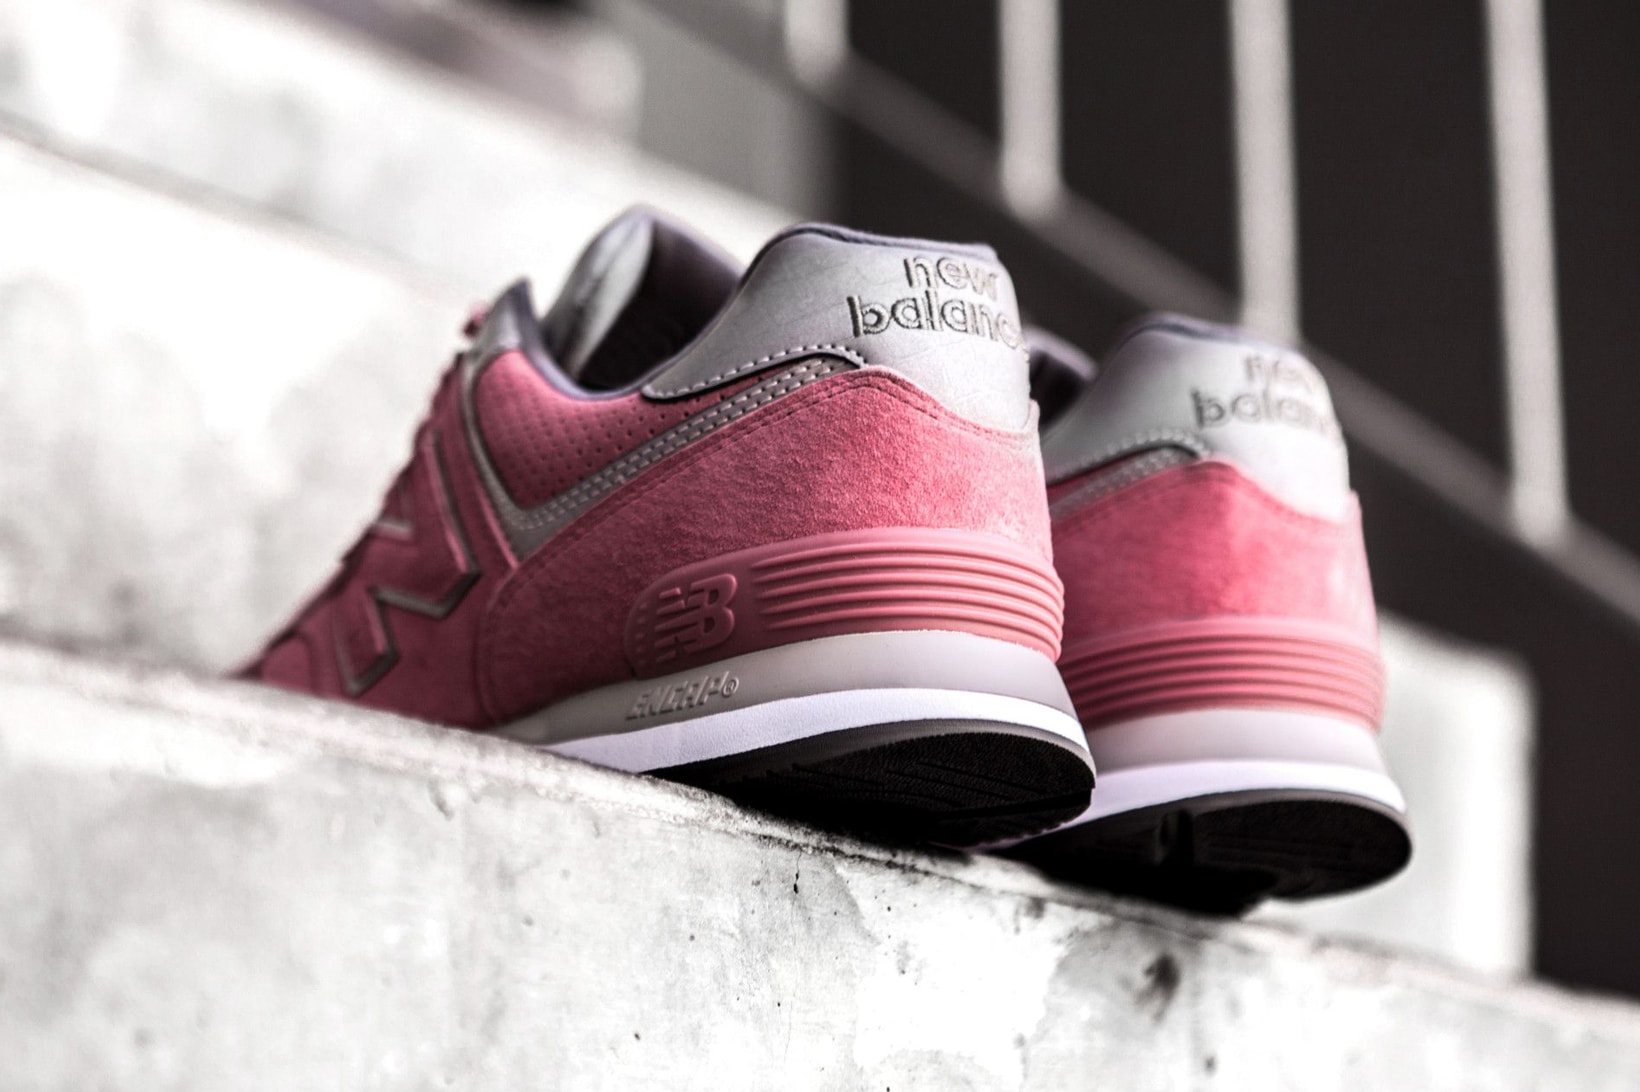 Concepts x New Balance 574 Rose Iconic Collaboration